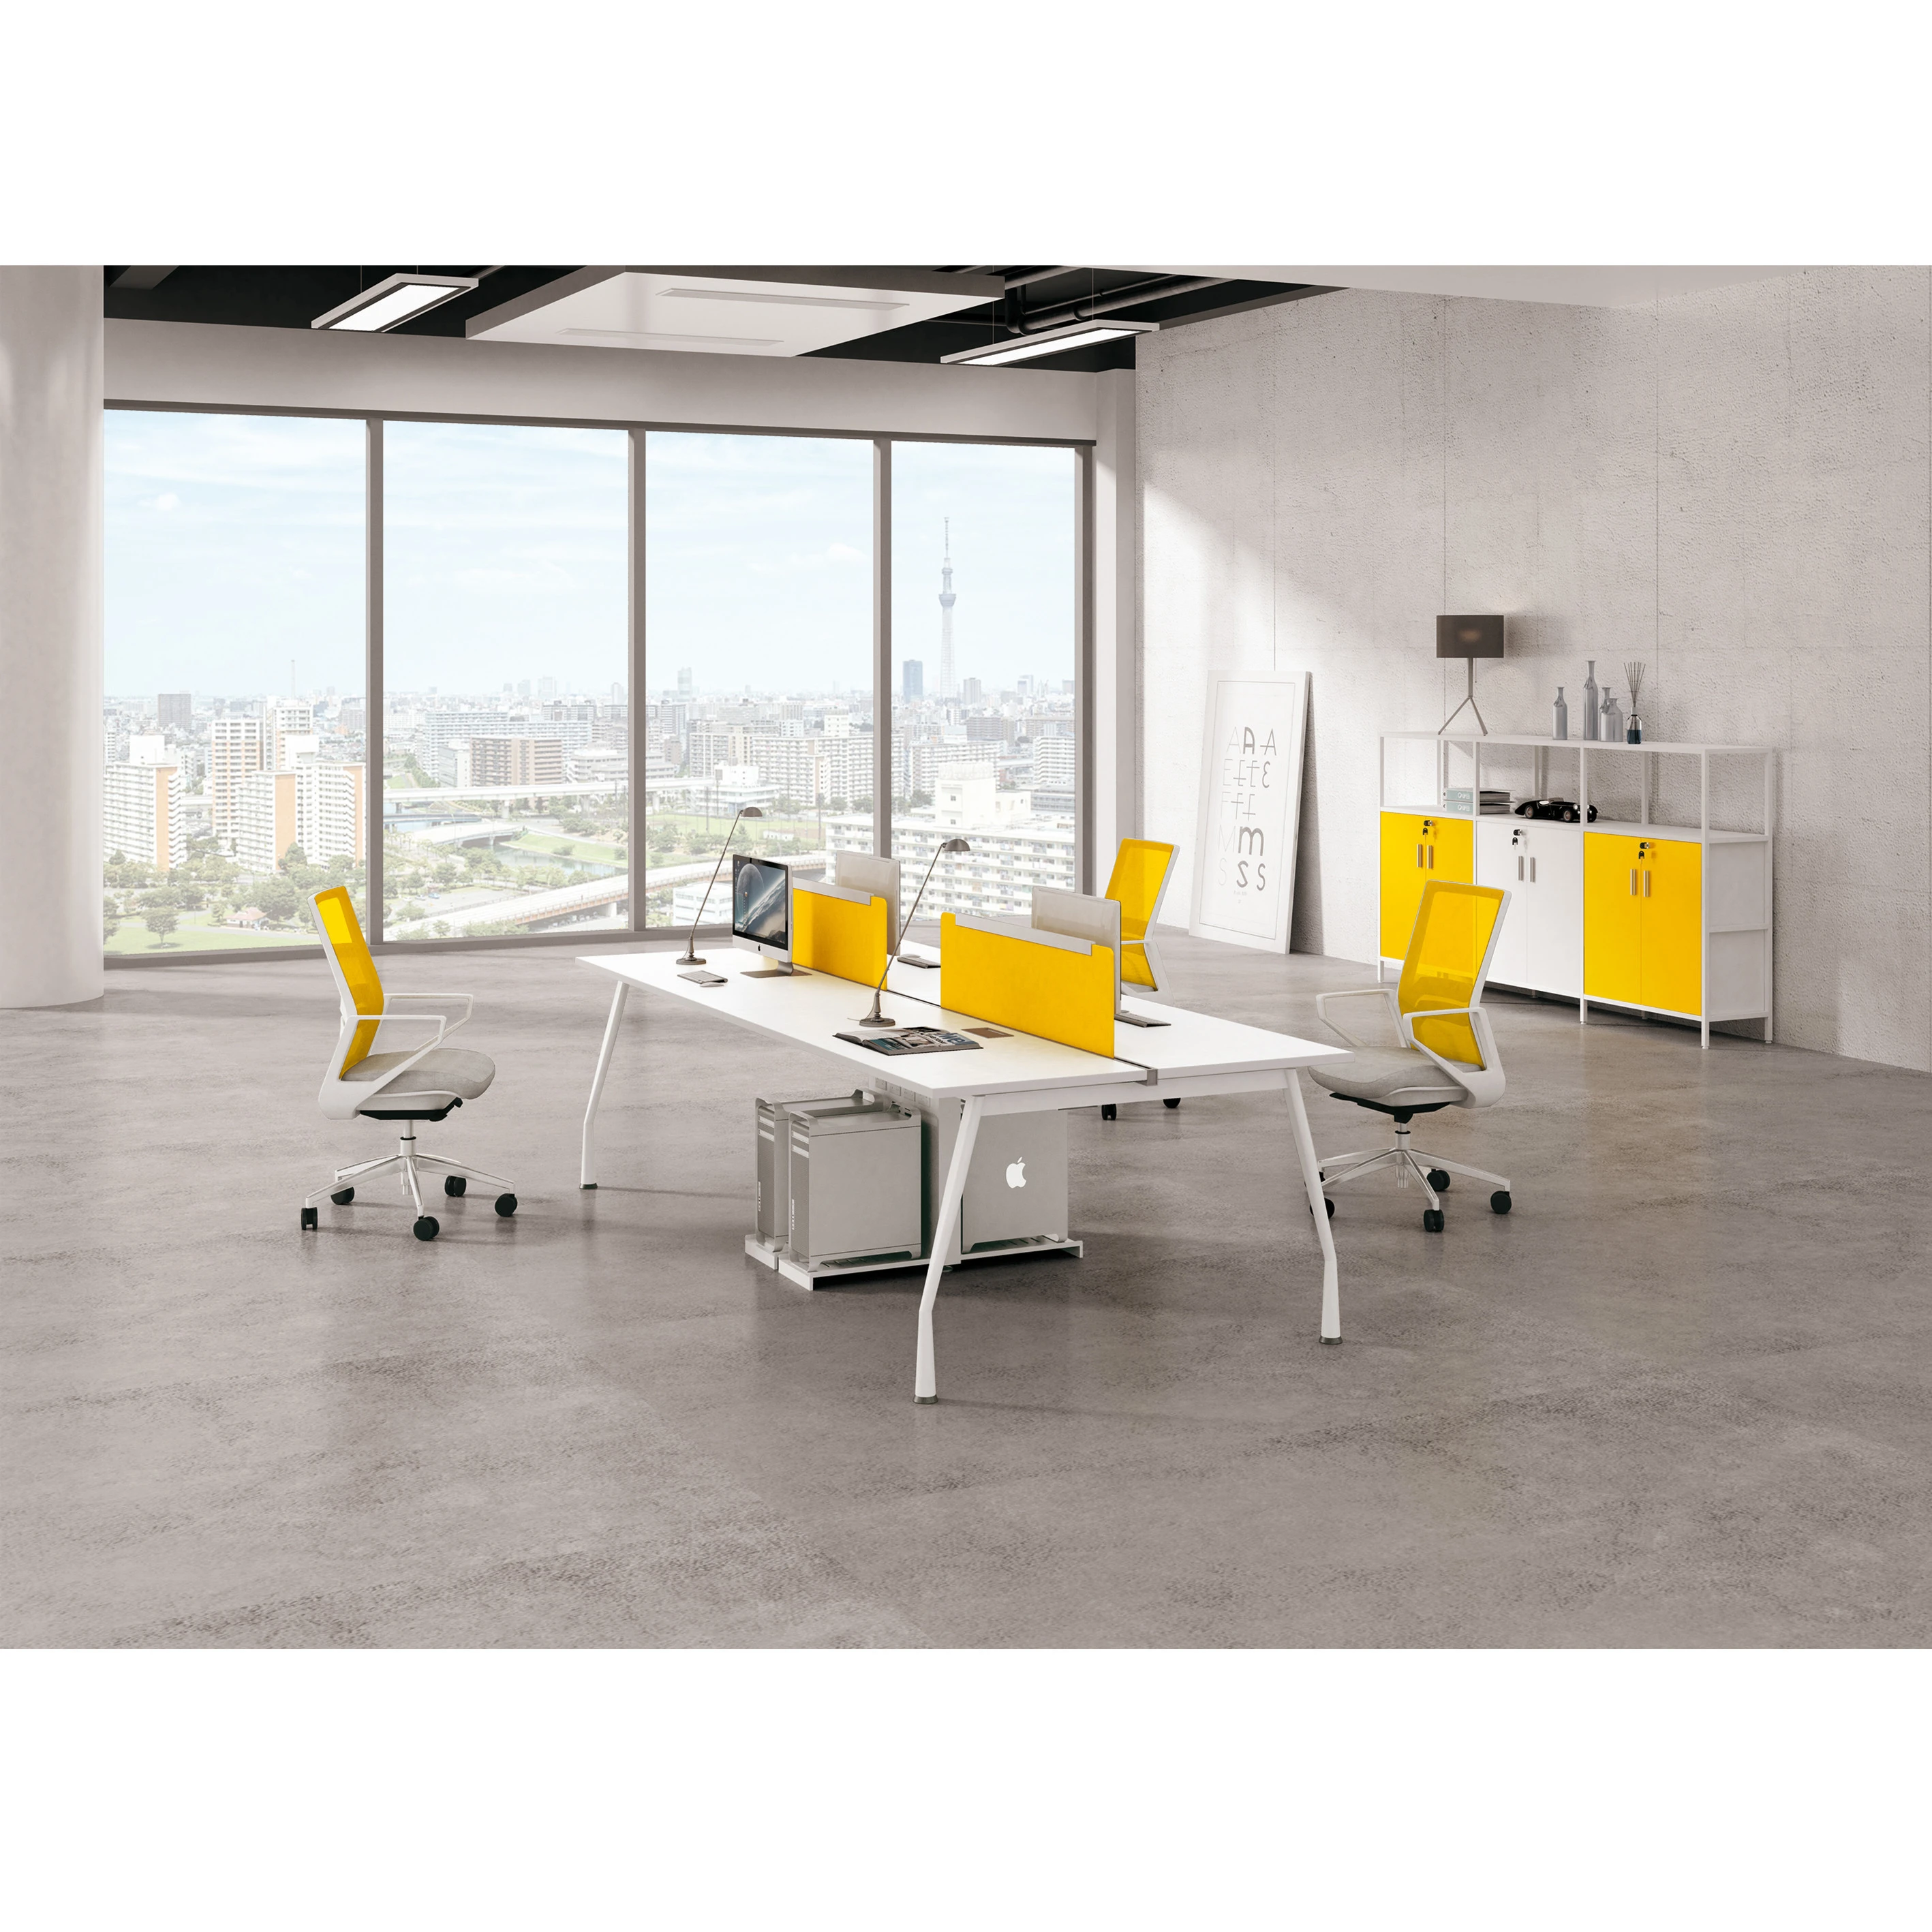 New arrival 2 person modular office partition standing desk converter workstation